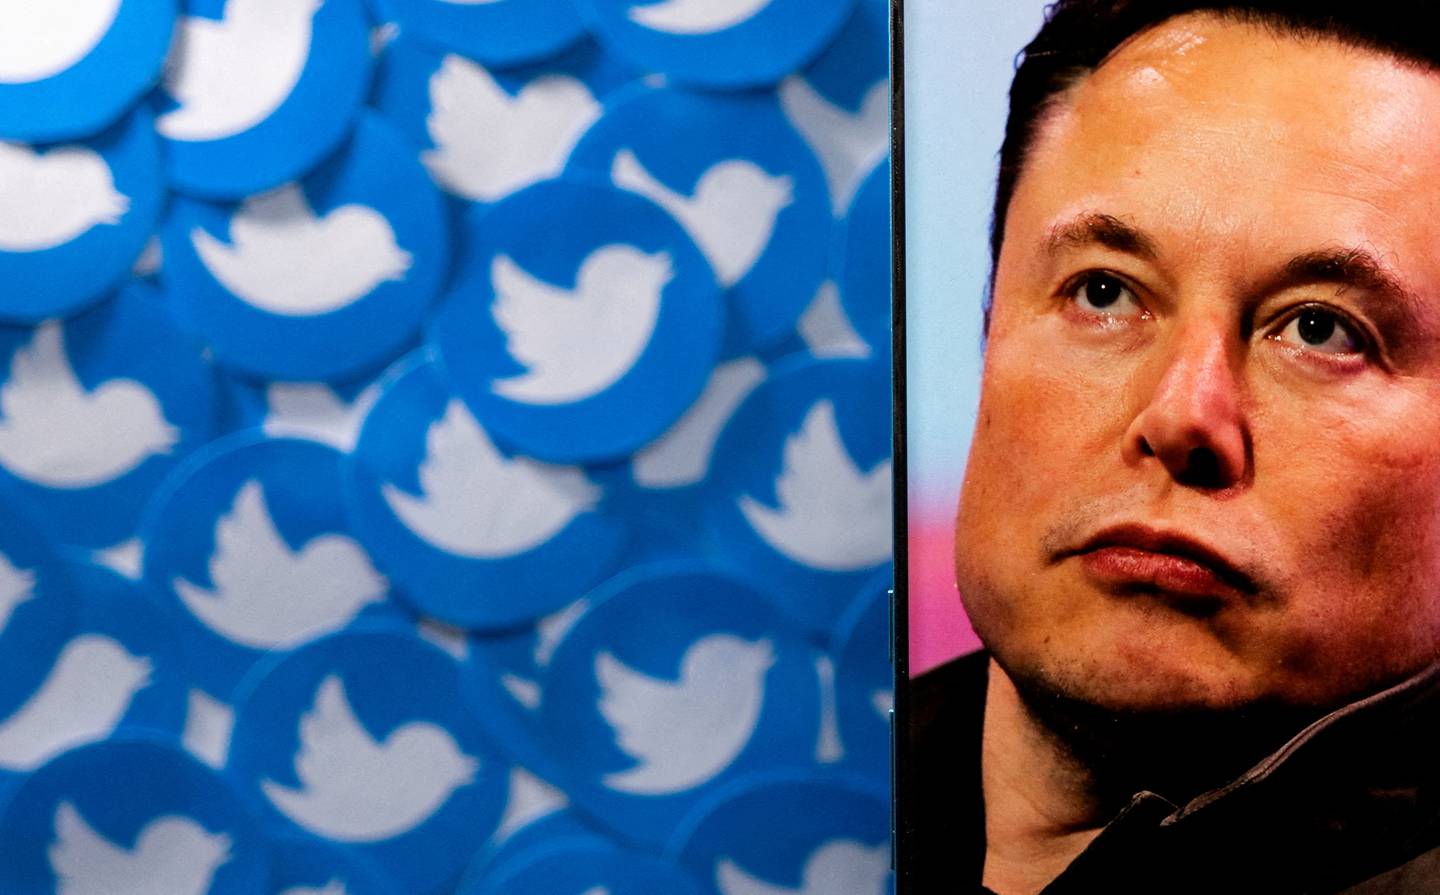 An image of Elon Musk is seen on a smartphone placed on printed Twitter logos. Reuters